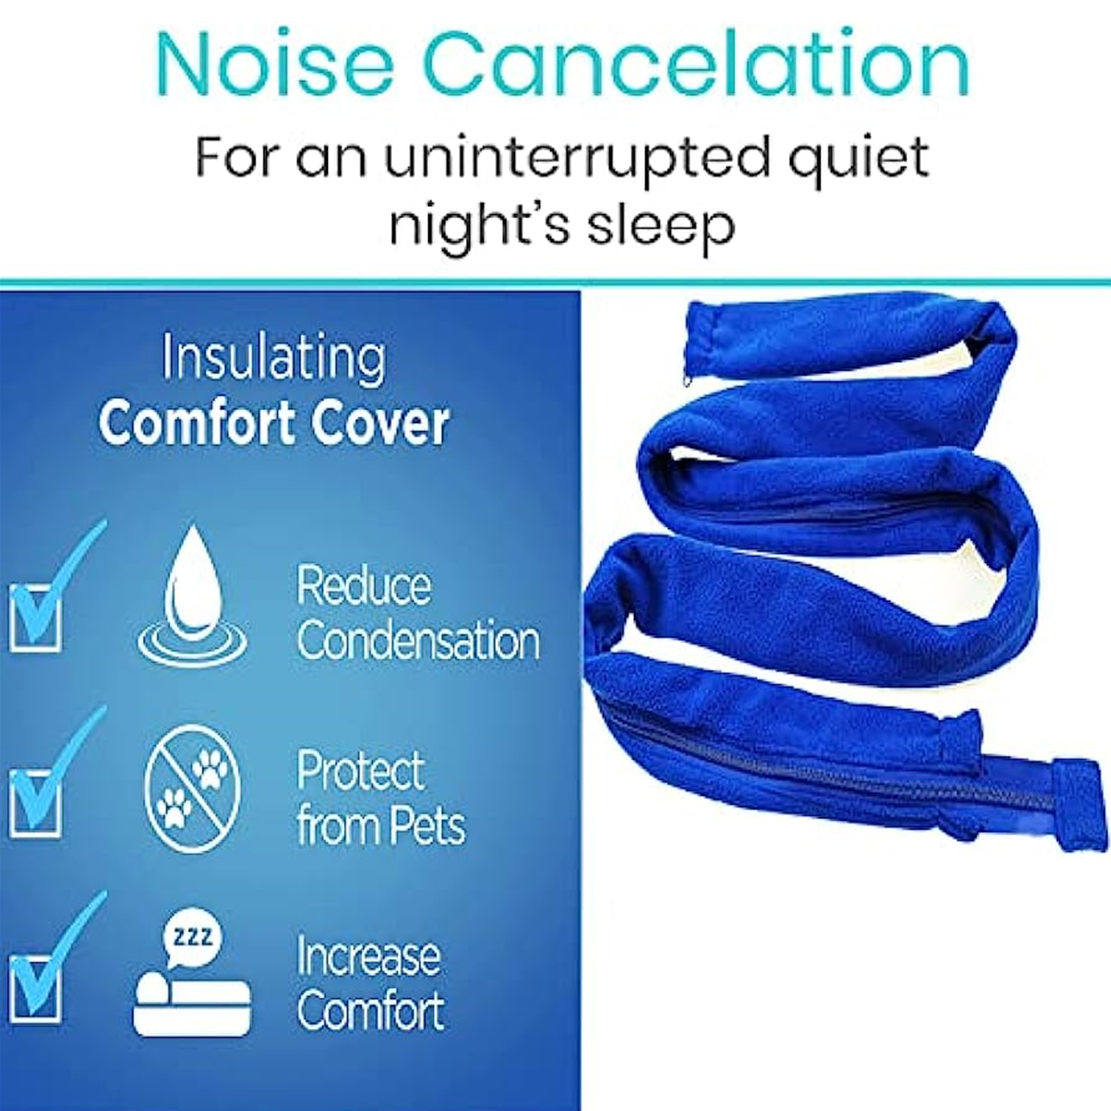 Stop CPAP Rainout or Condensation with the CozyHose Cover from Pur-Sleep  